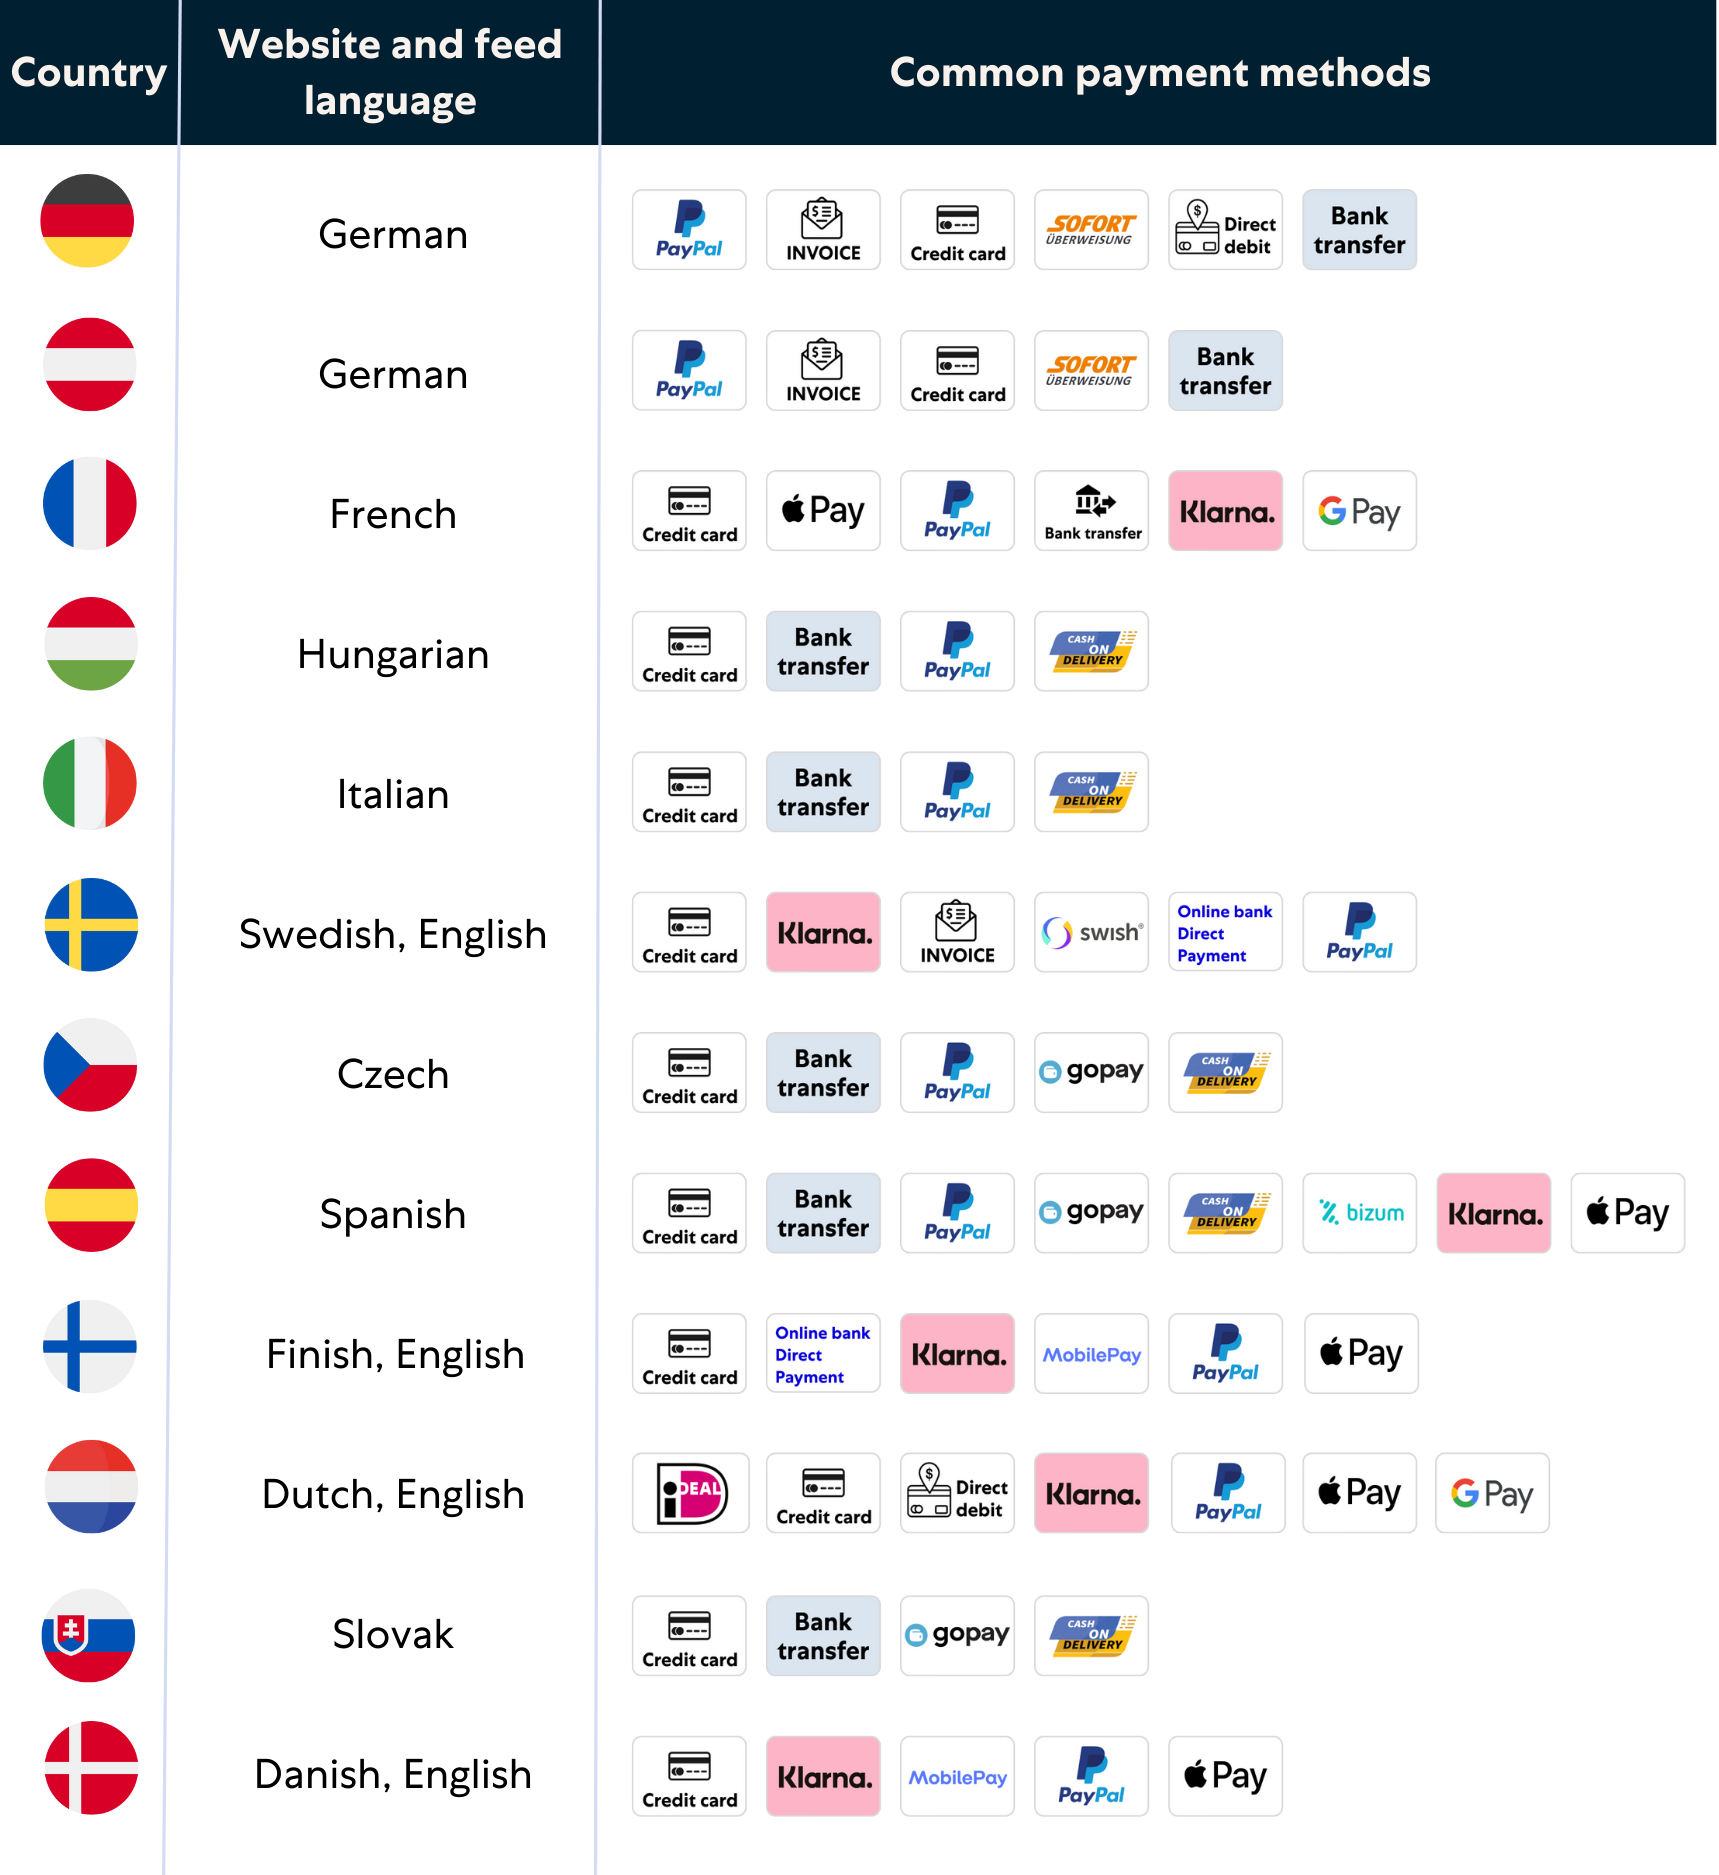 Infographic with languages and preferred payment methods across 12 Ladenzeile markets